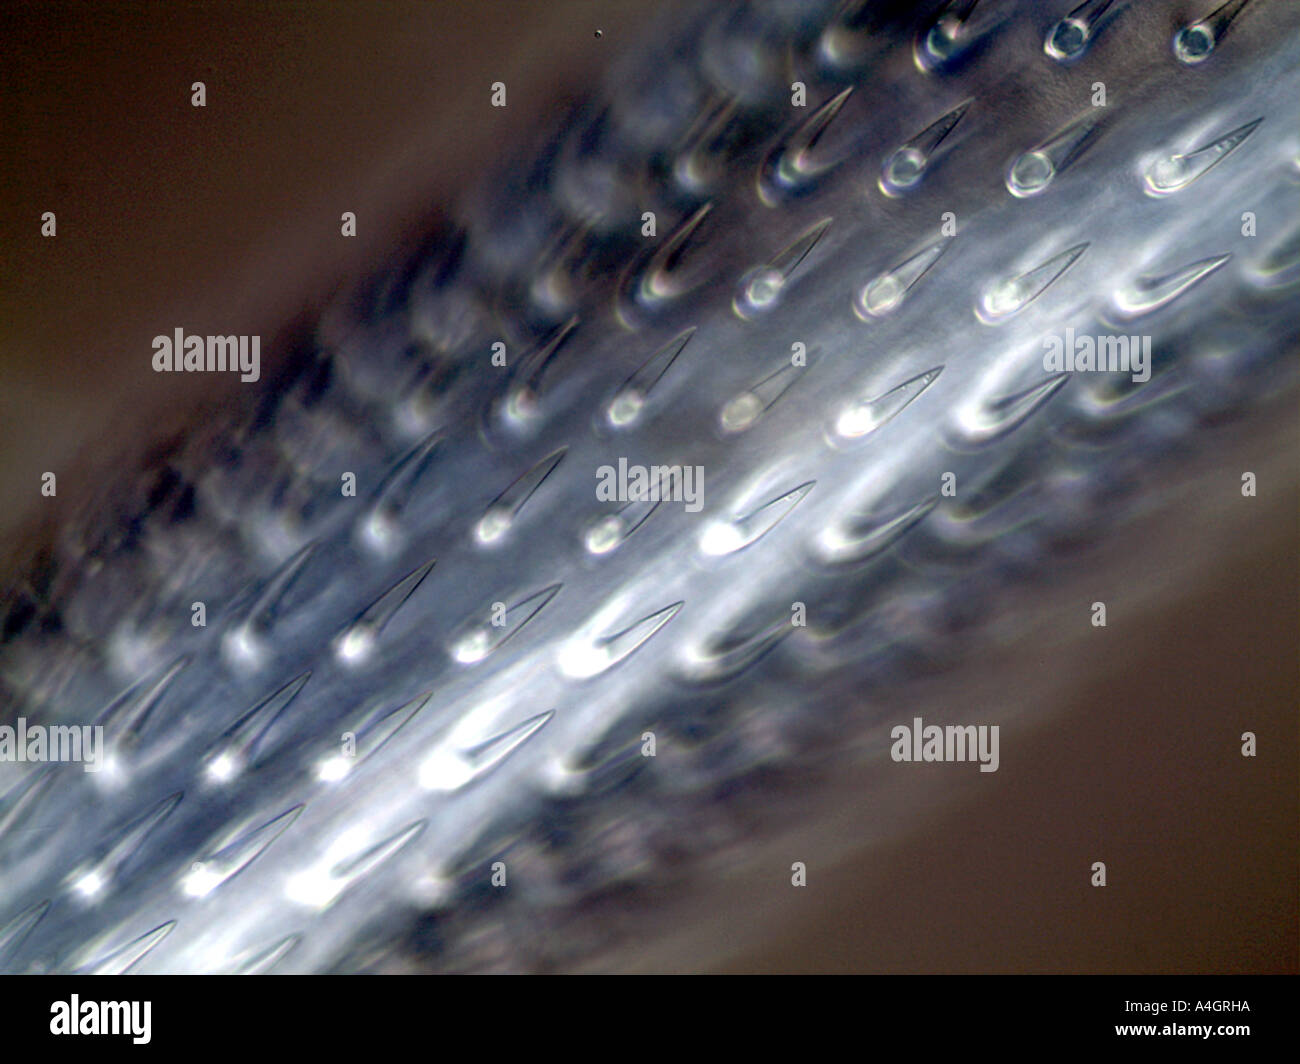 Spines on the proboscis of an acanthocephalan, a type of parasitic worm in a bluefish Stock Photo